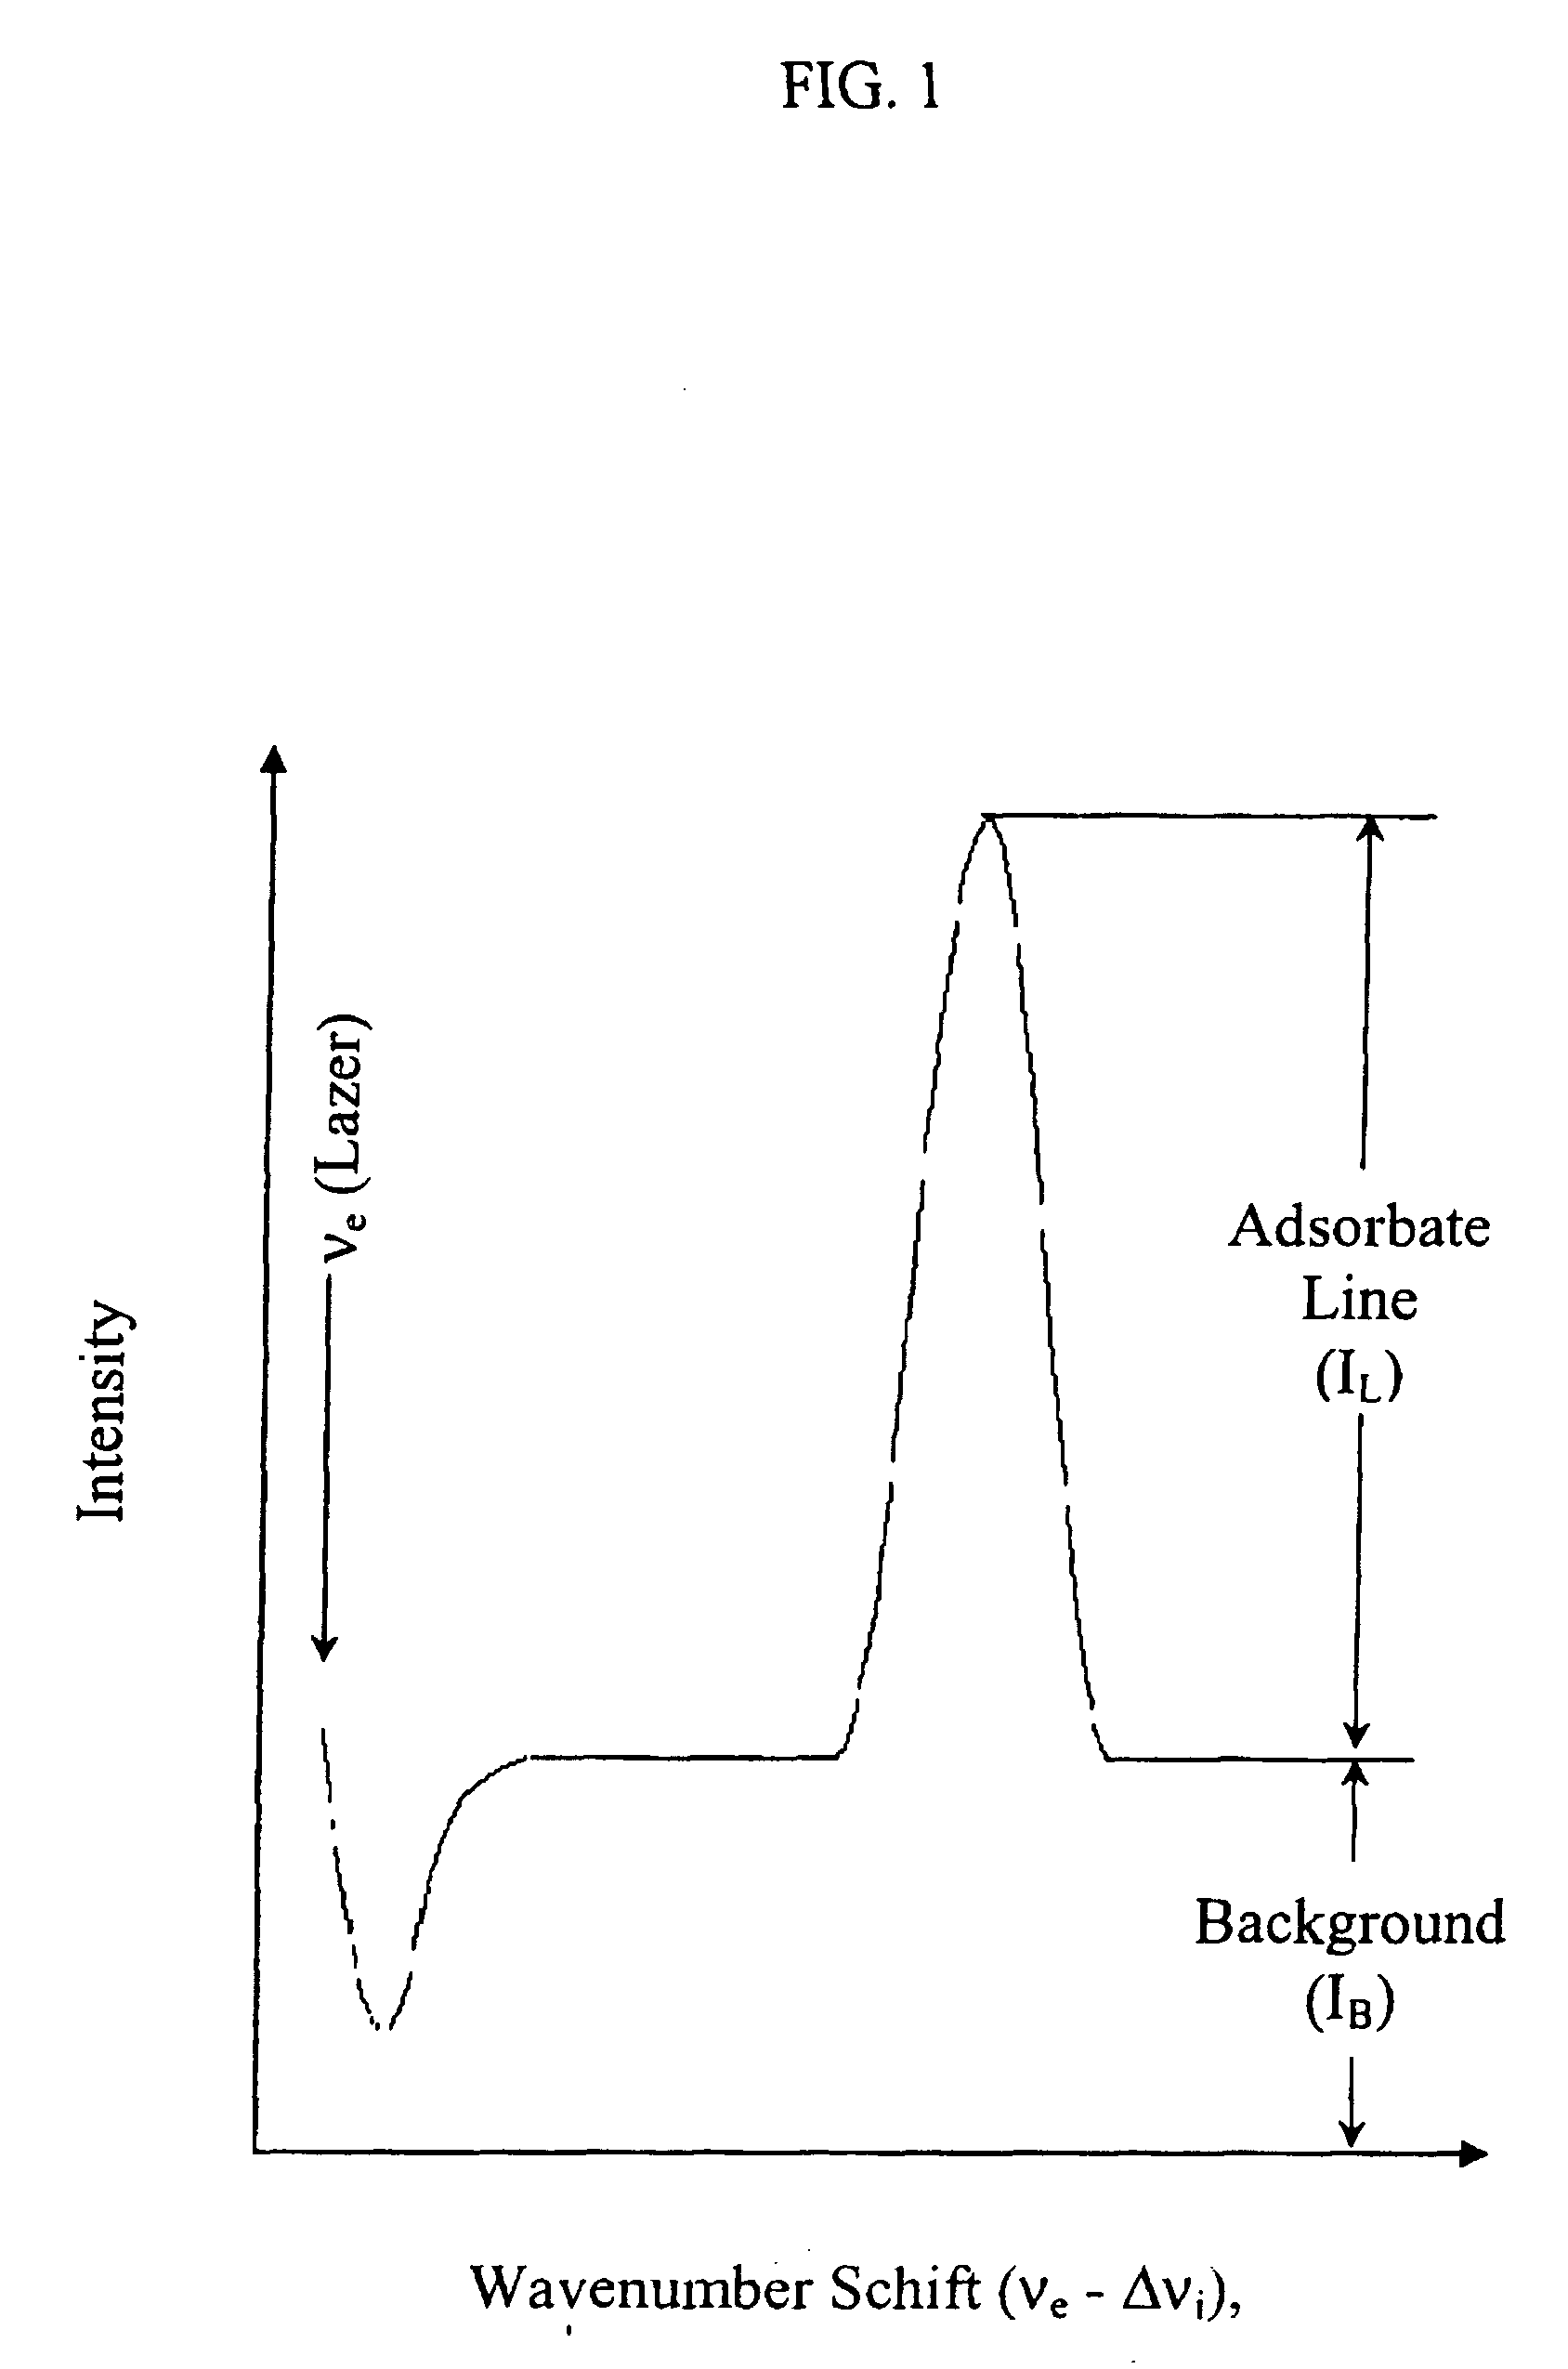 Method and apparatus for detection and quantitation of impurities in electrolytic solutions